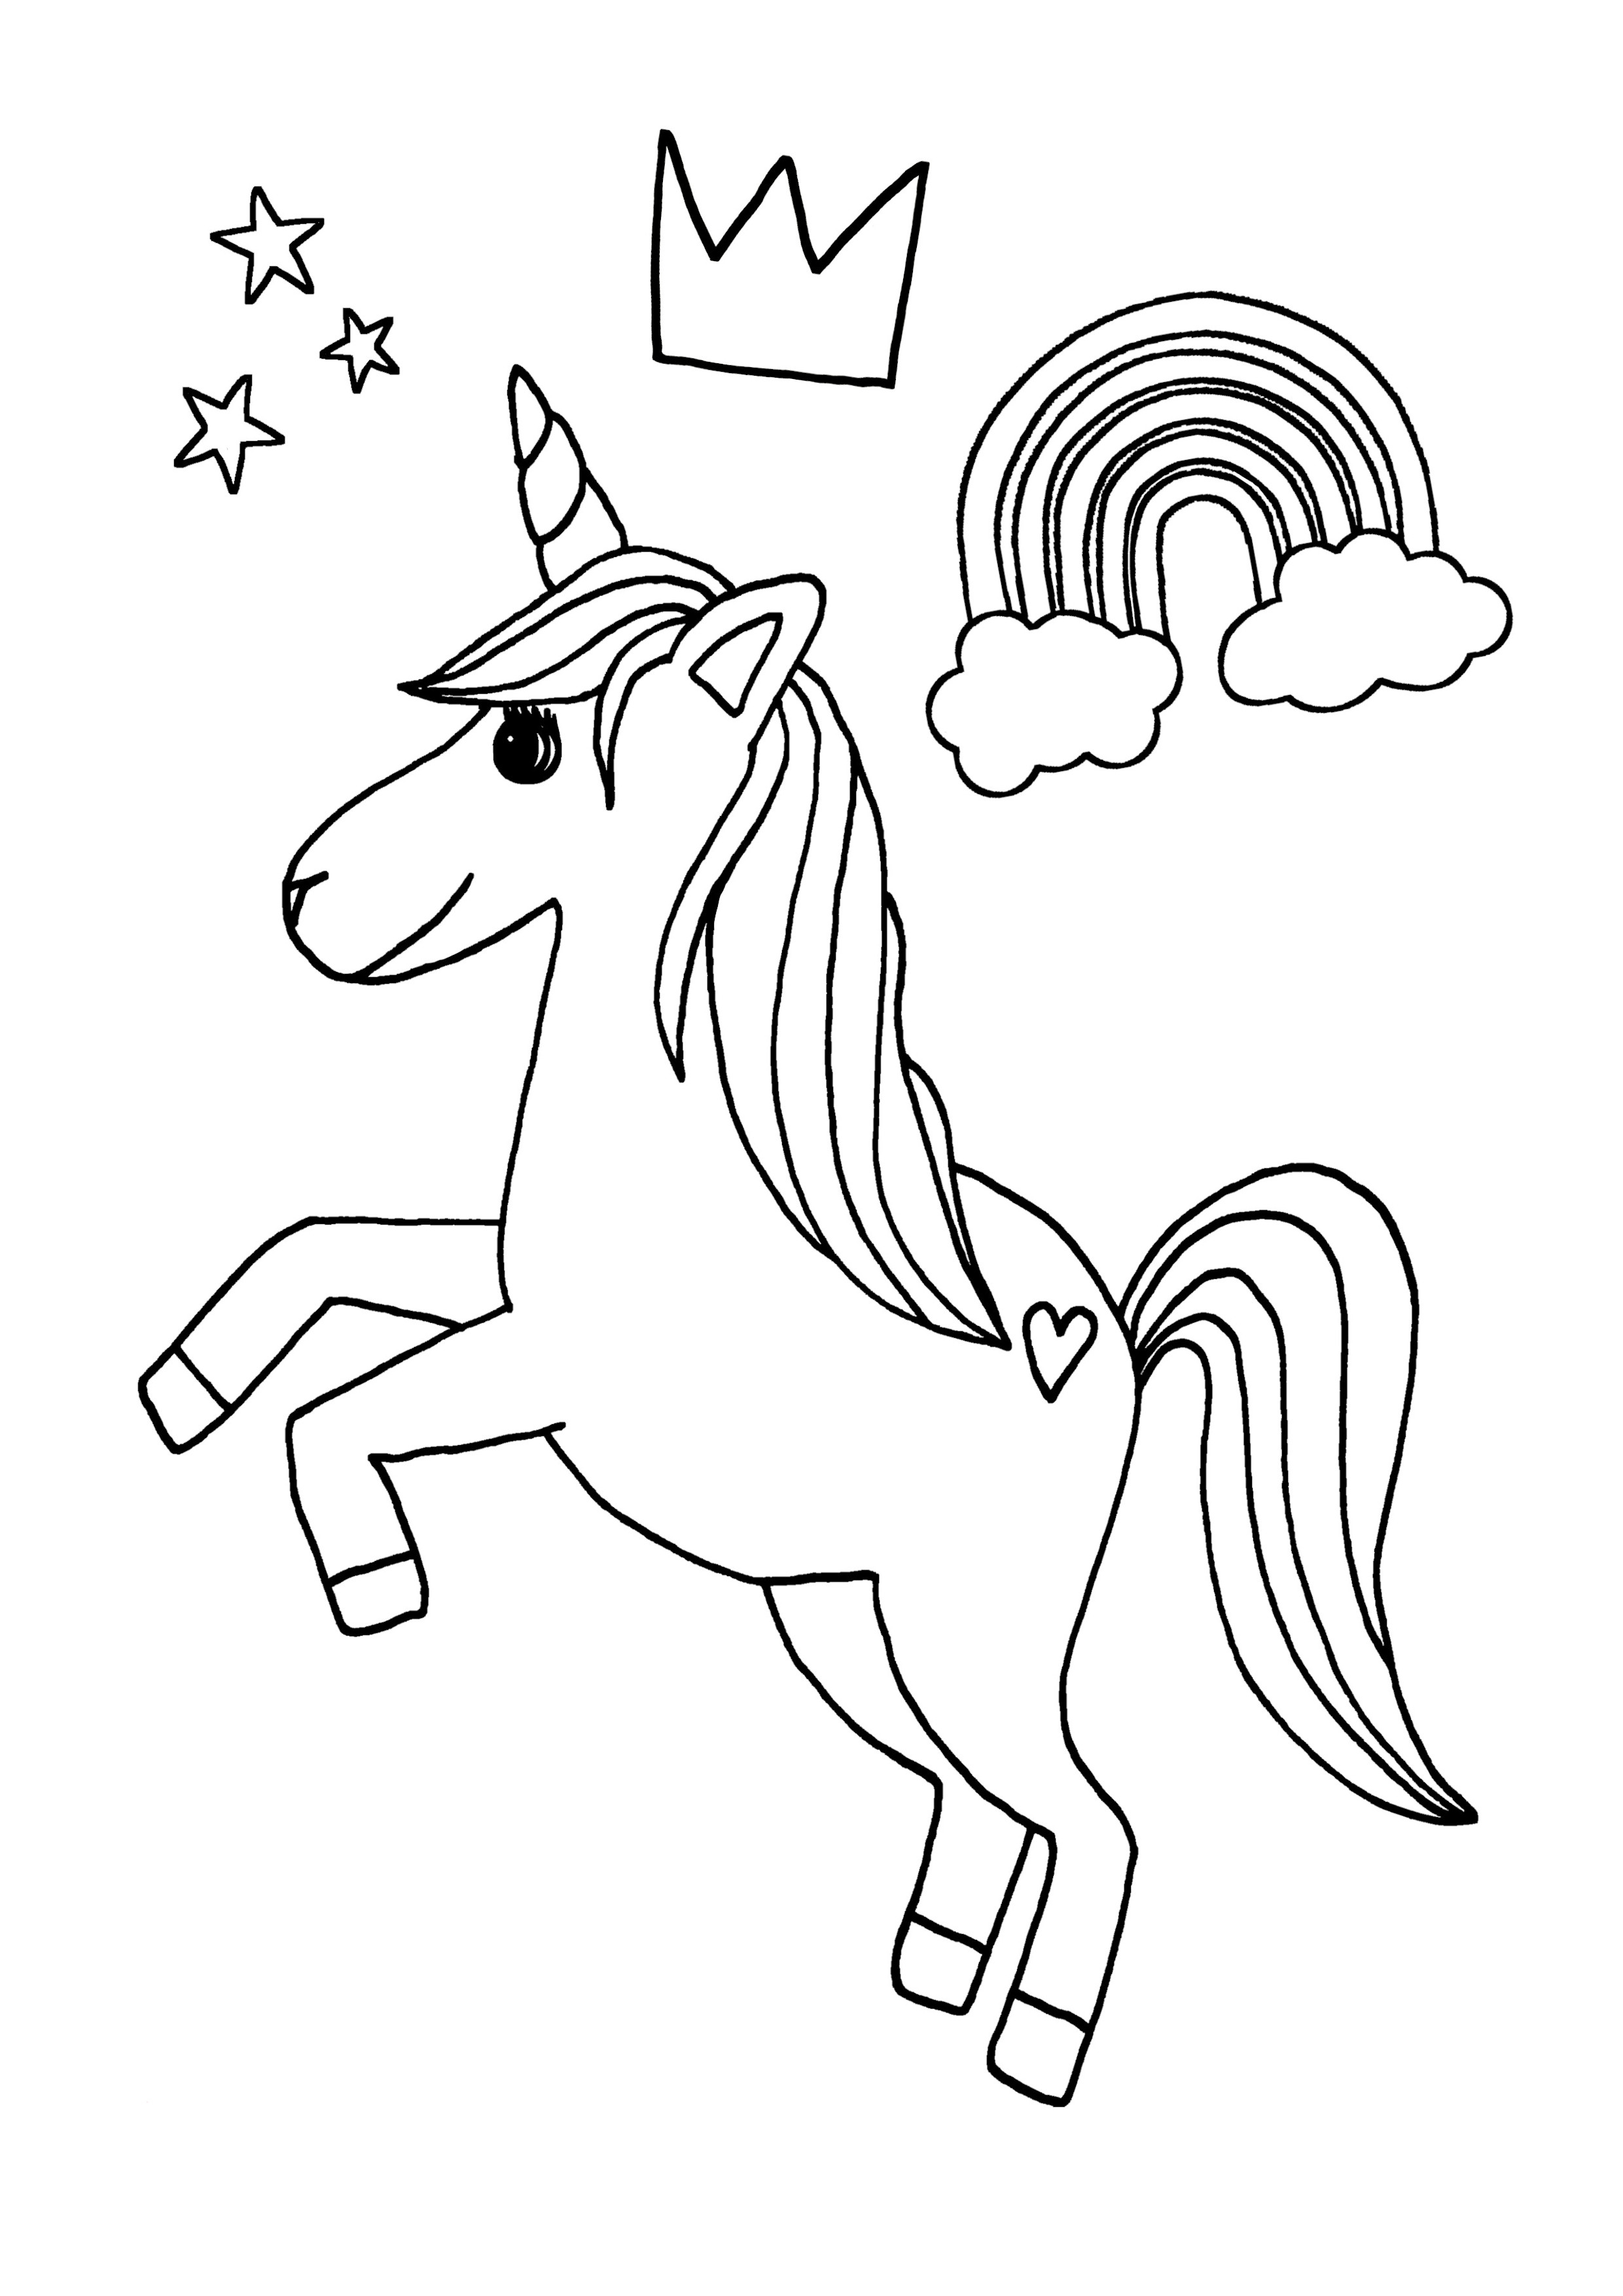 Kids Free Coloring Printables - Aimee Gray Illustration